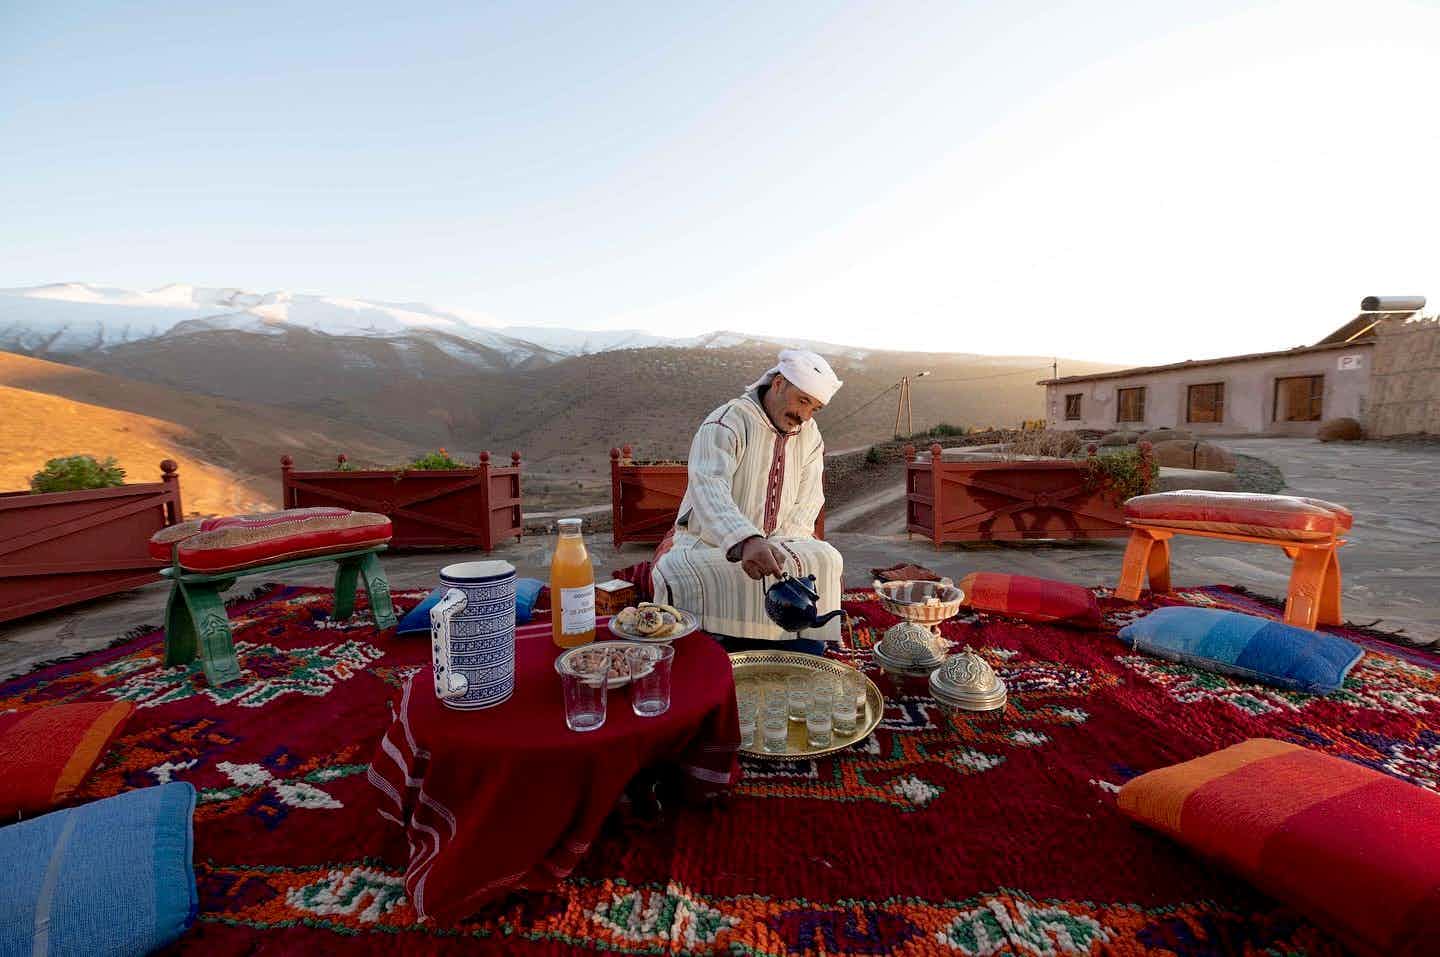 Local berber man pouring tea on a red rug in Atlas Mountains, Morocco